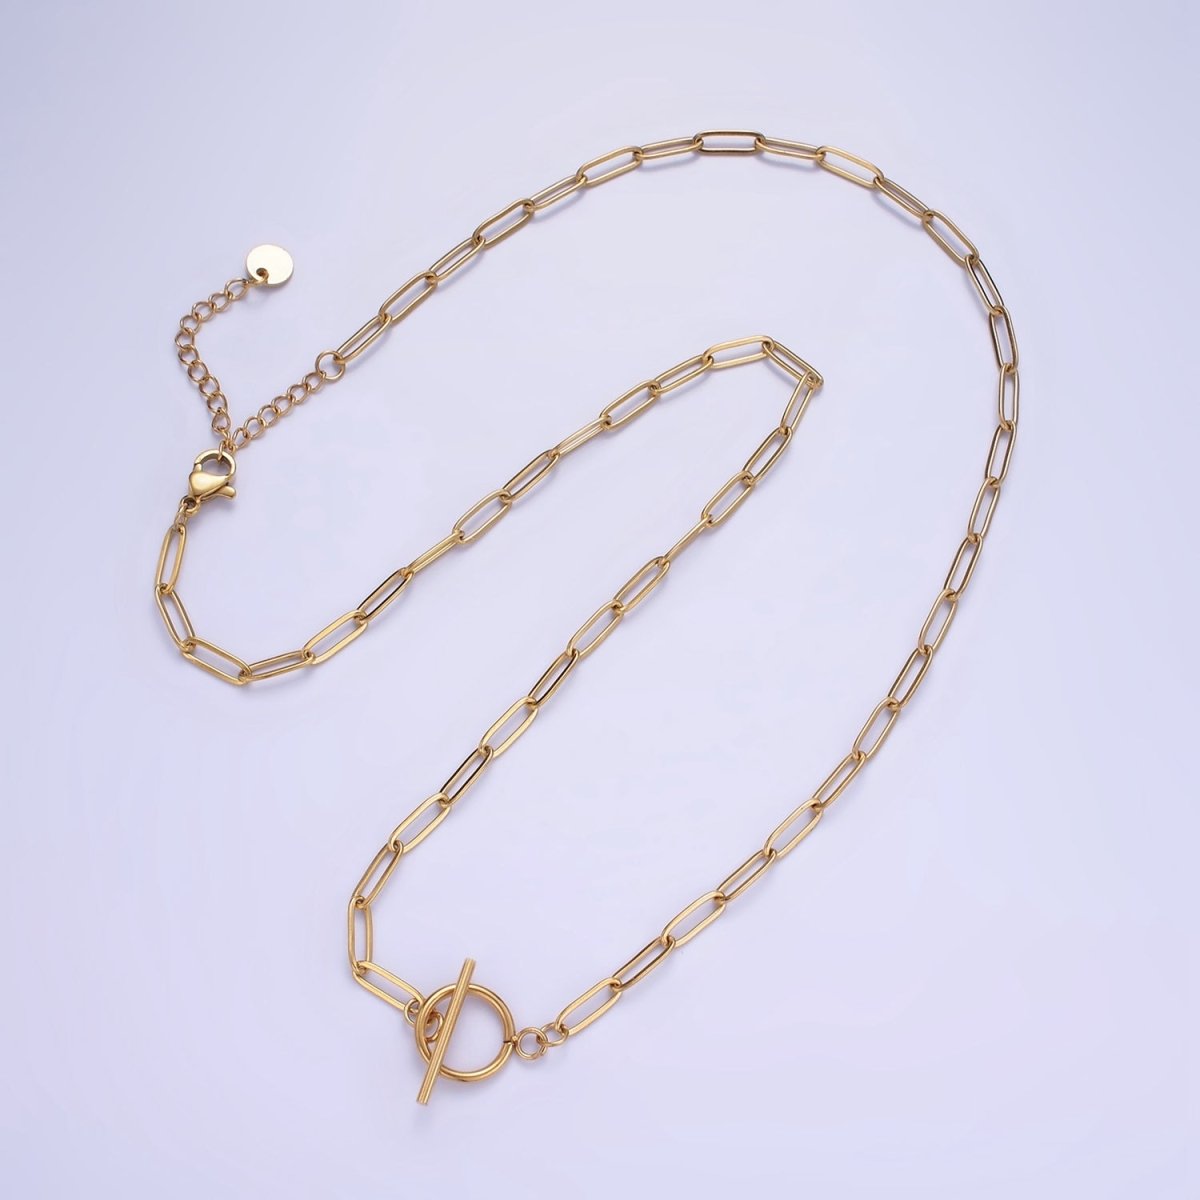 14K Gold Filled Toggle Clasps Paperclip Chain 19 Inch Necklace w. 2 Inch Extender in Gold & Silver | WA-2492 WA-2493 - DLUXCA